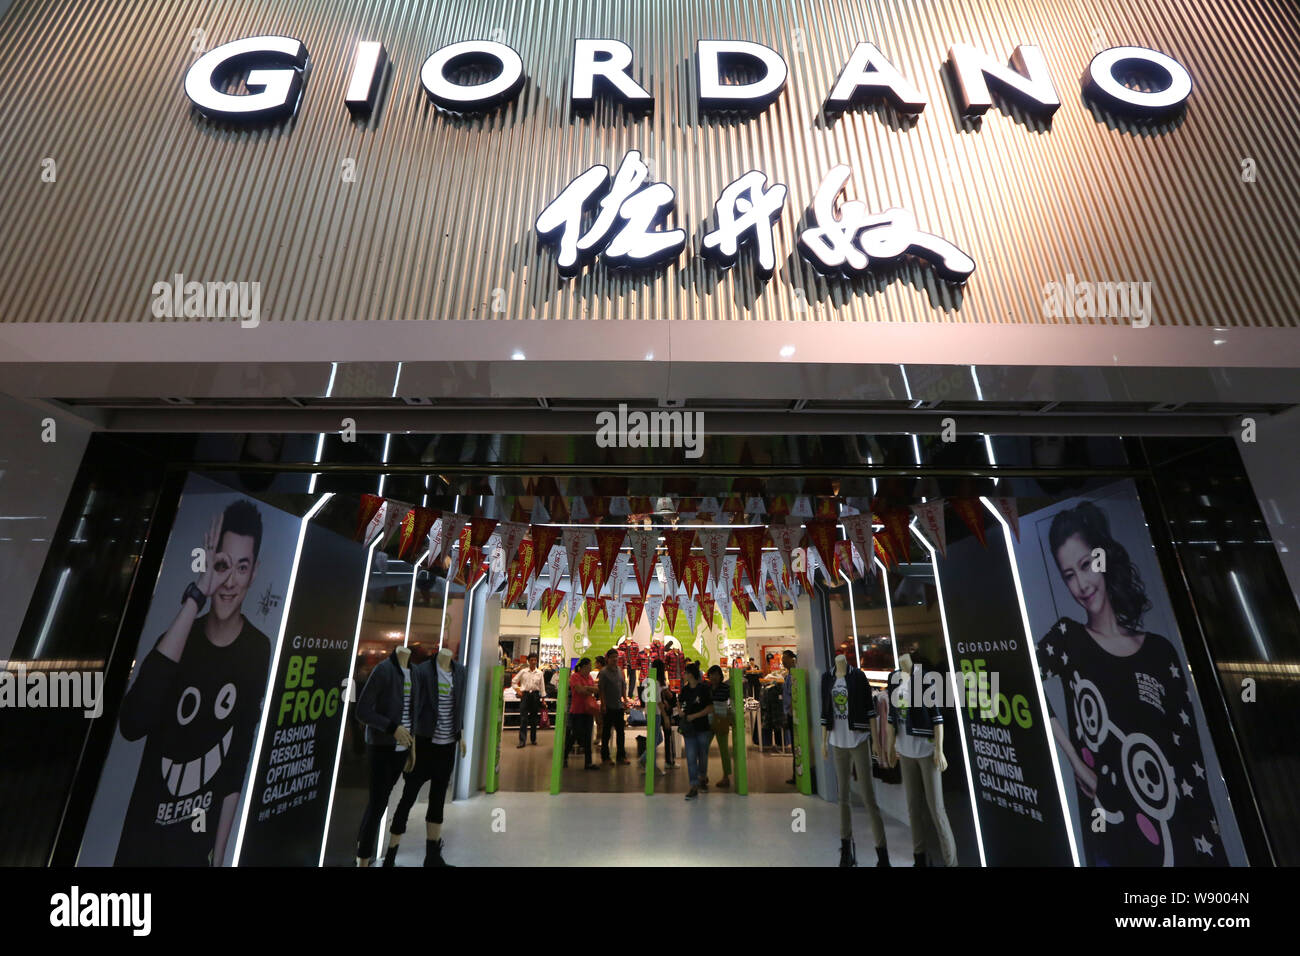 FILE--Customers shop at a store of Giordano in Shanghai, China, 30  September 2013. Multinational casual wear brands Meters/bonwe, Giordano,  Esprit Stock Photo - Alamy